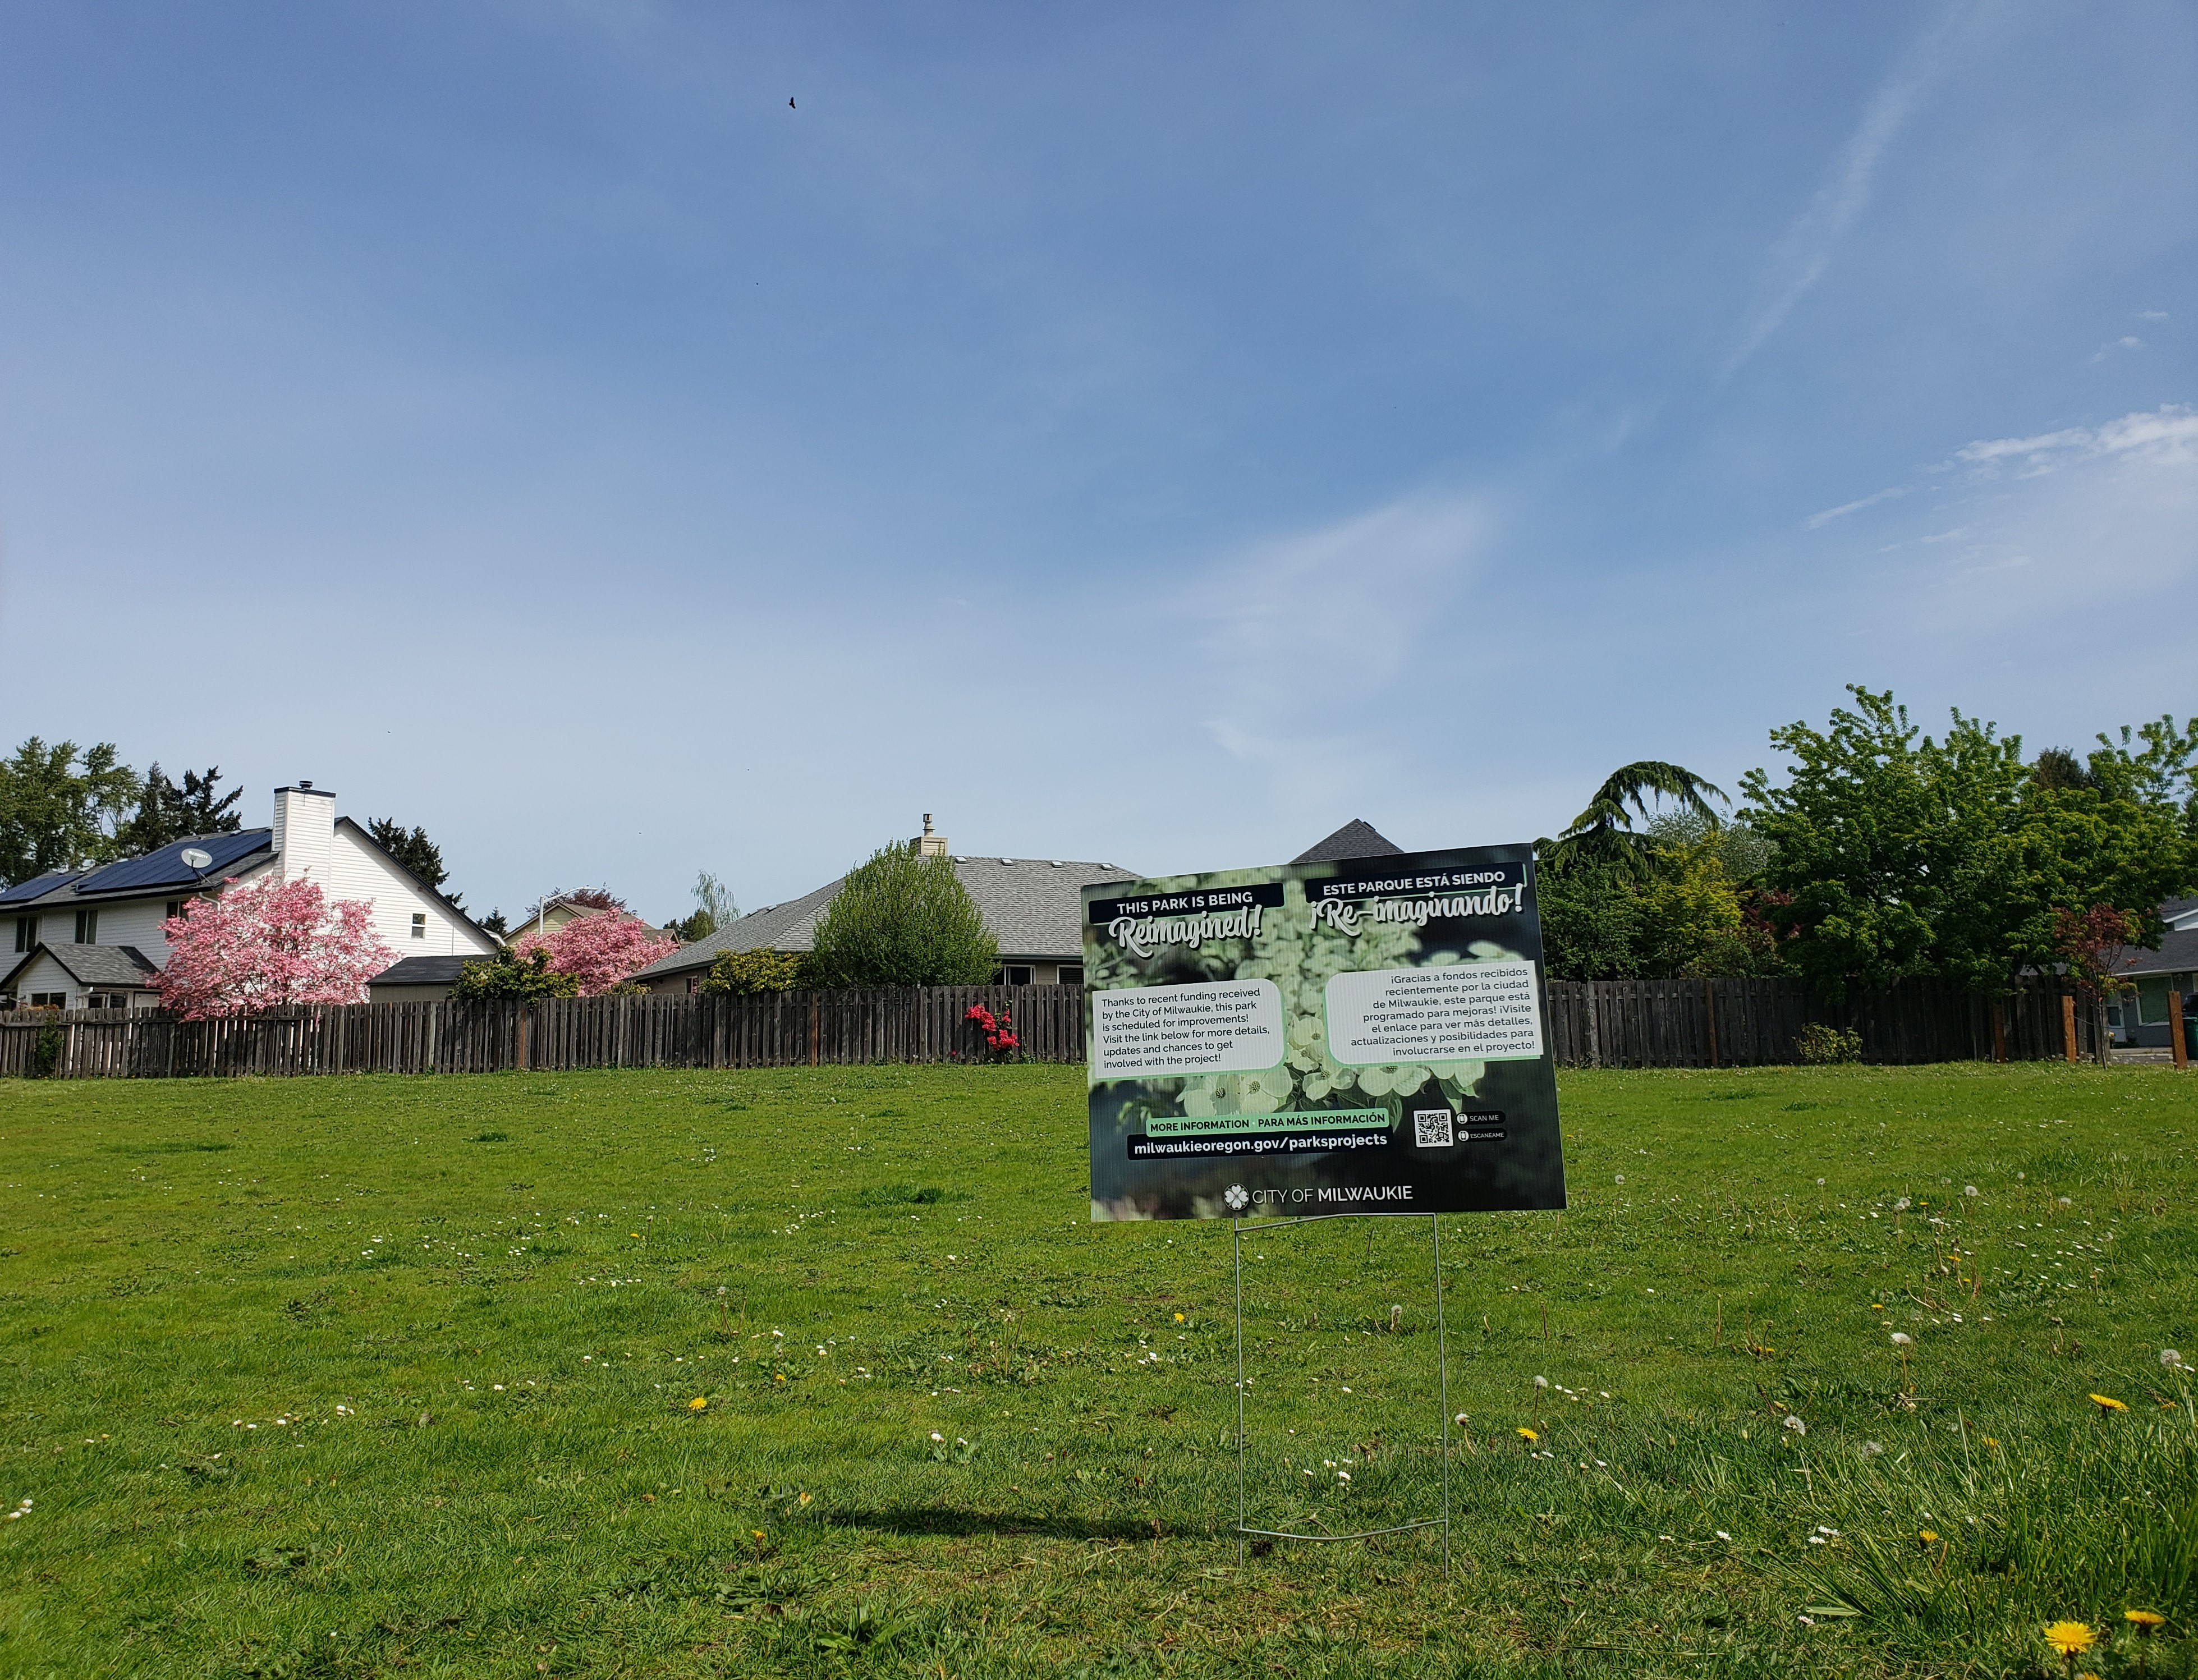  A yard sign explaining the park will be reimagined is on grass field under a blue sky with houses in the background.